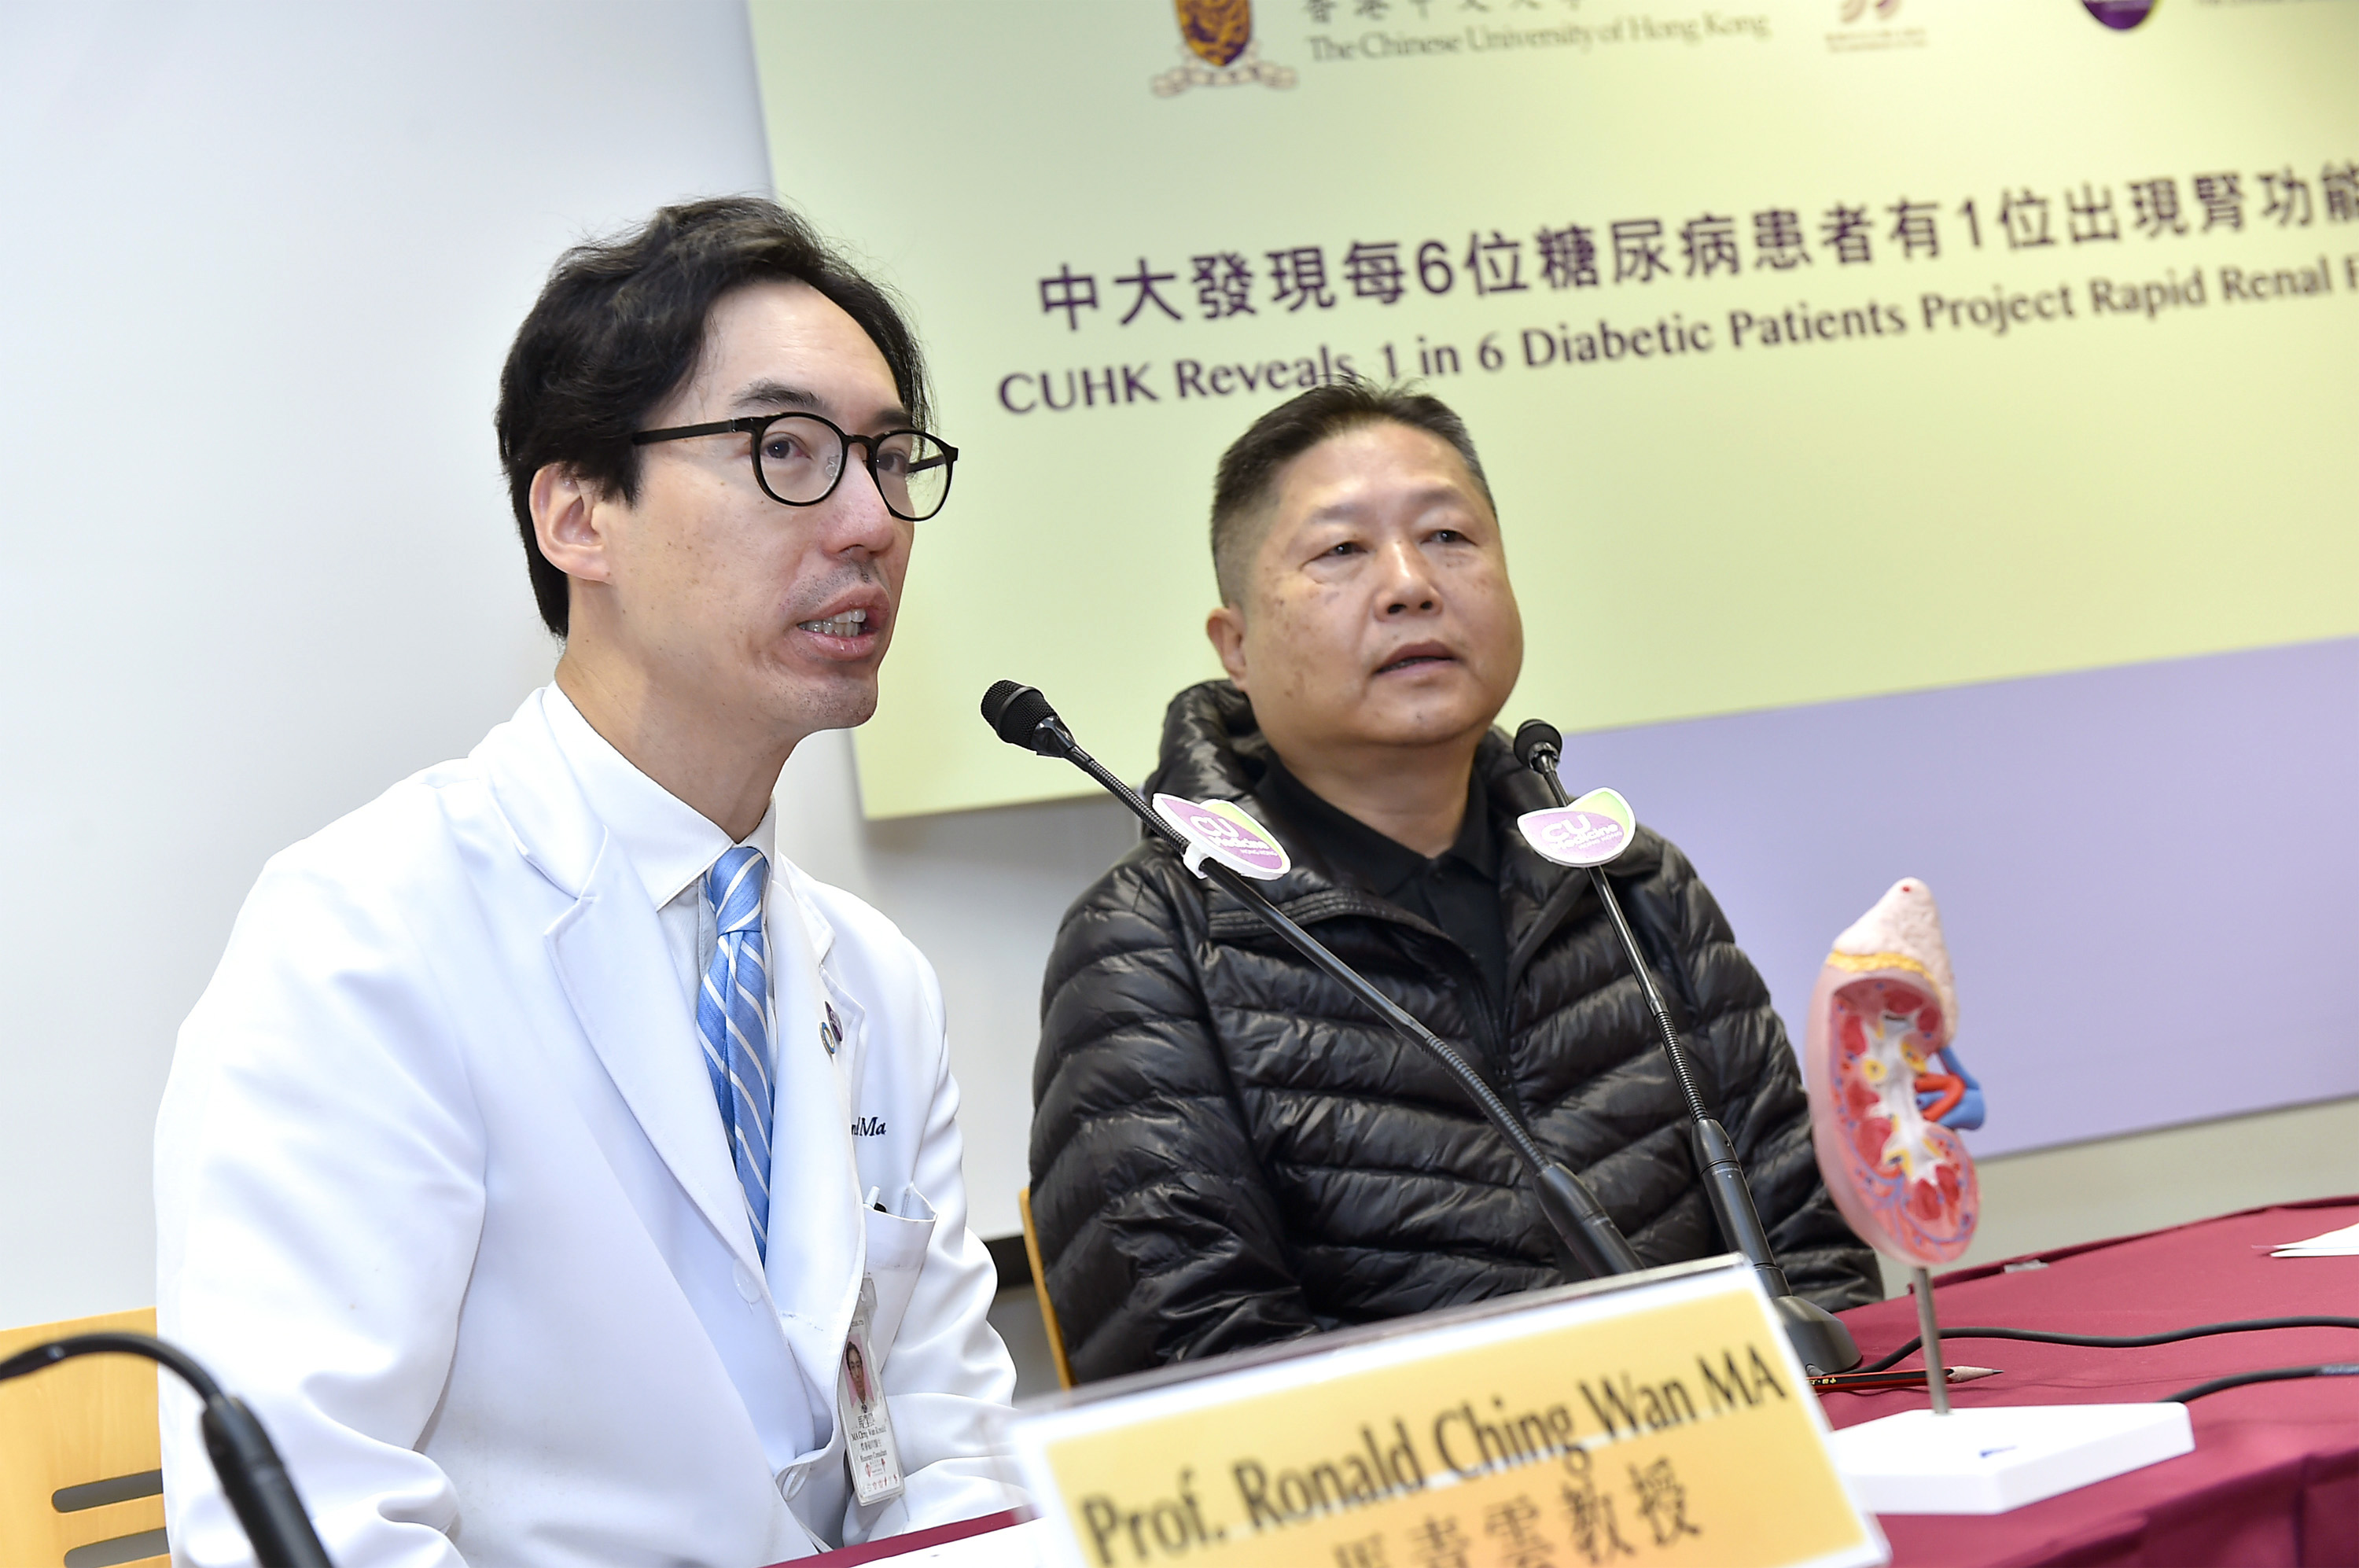 Mr. FU said he had no other symptoms of kidney disease except fatigue. He worried that he would have to undergo dialysis treatment when told to have diabetic kidney disease. He now measures blood pressure regularly and takes medicine on time to better manage his diabetic and kidney function conditions.